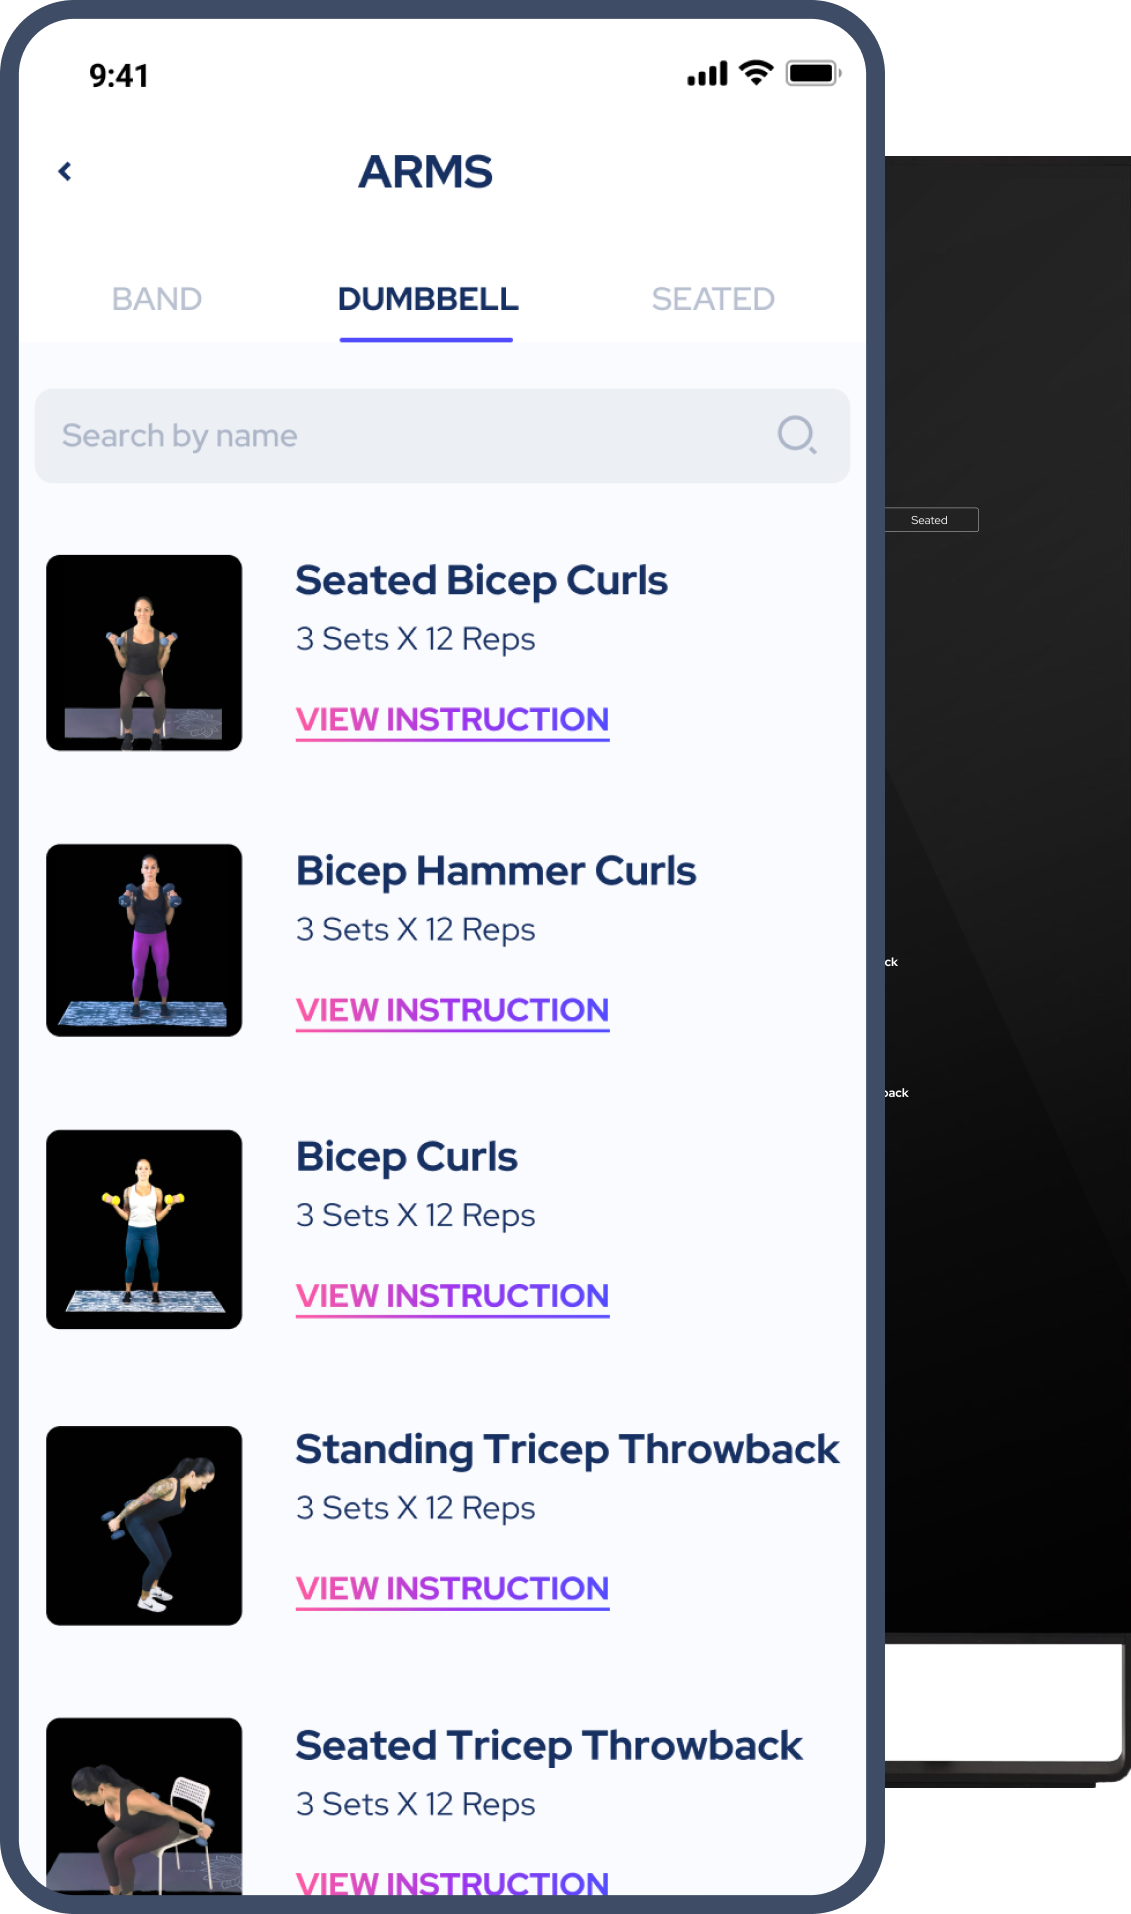 Limitless Workouts, Anywhere: Explore Thousands of Exercises on our App.